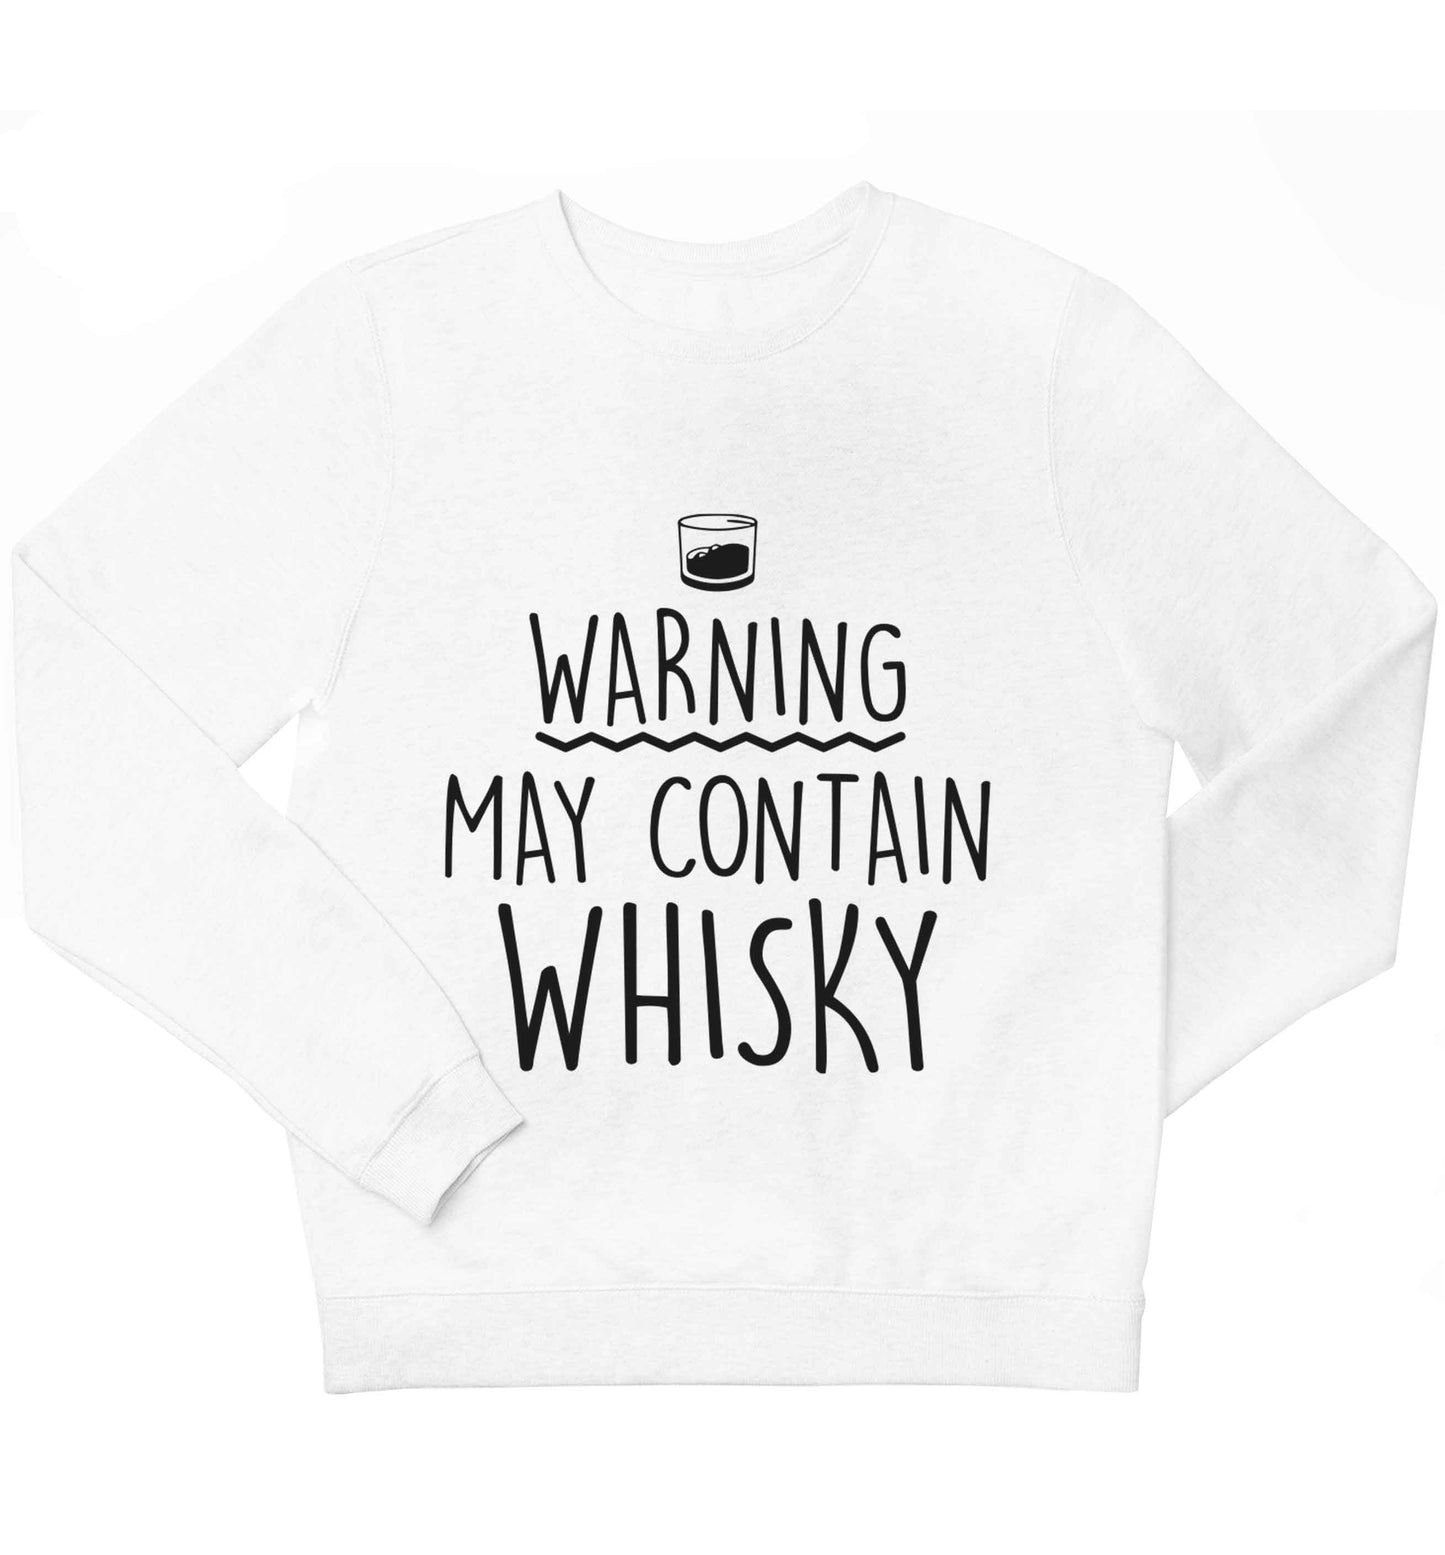 Warning may contain whisky adult's unisex black sweater 2XL